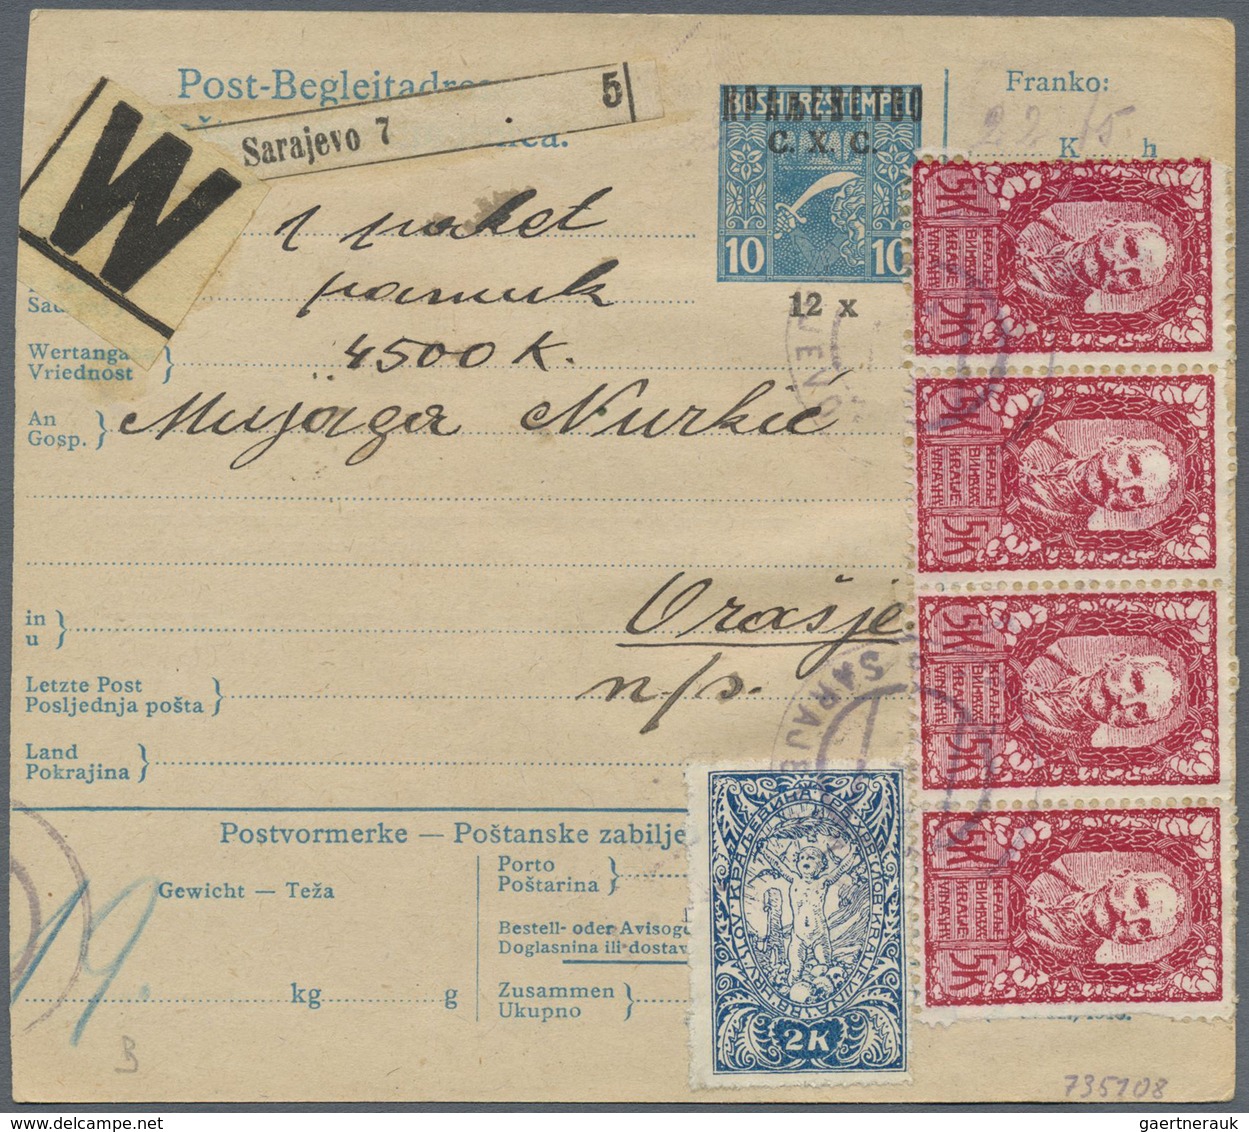 Br/GA Jugoslawien: 1918/1925, interesting collection of ca. 180 post accompany adresses, package cards, mo